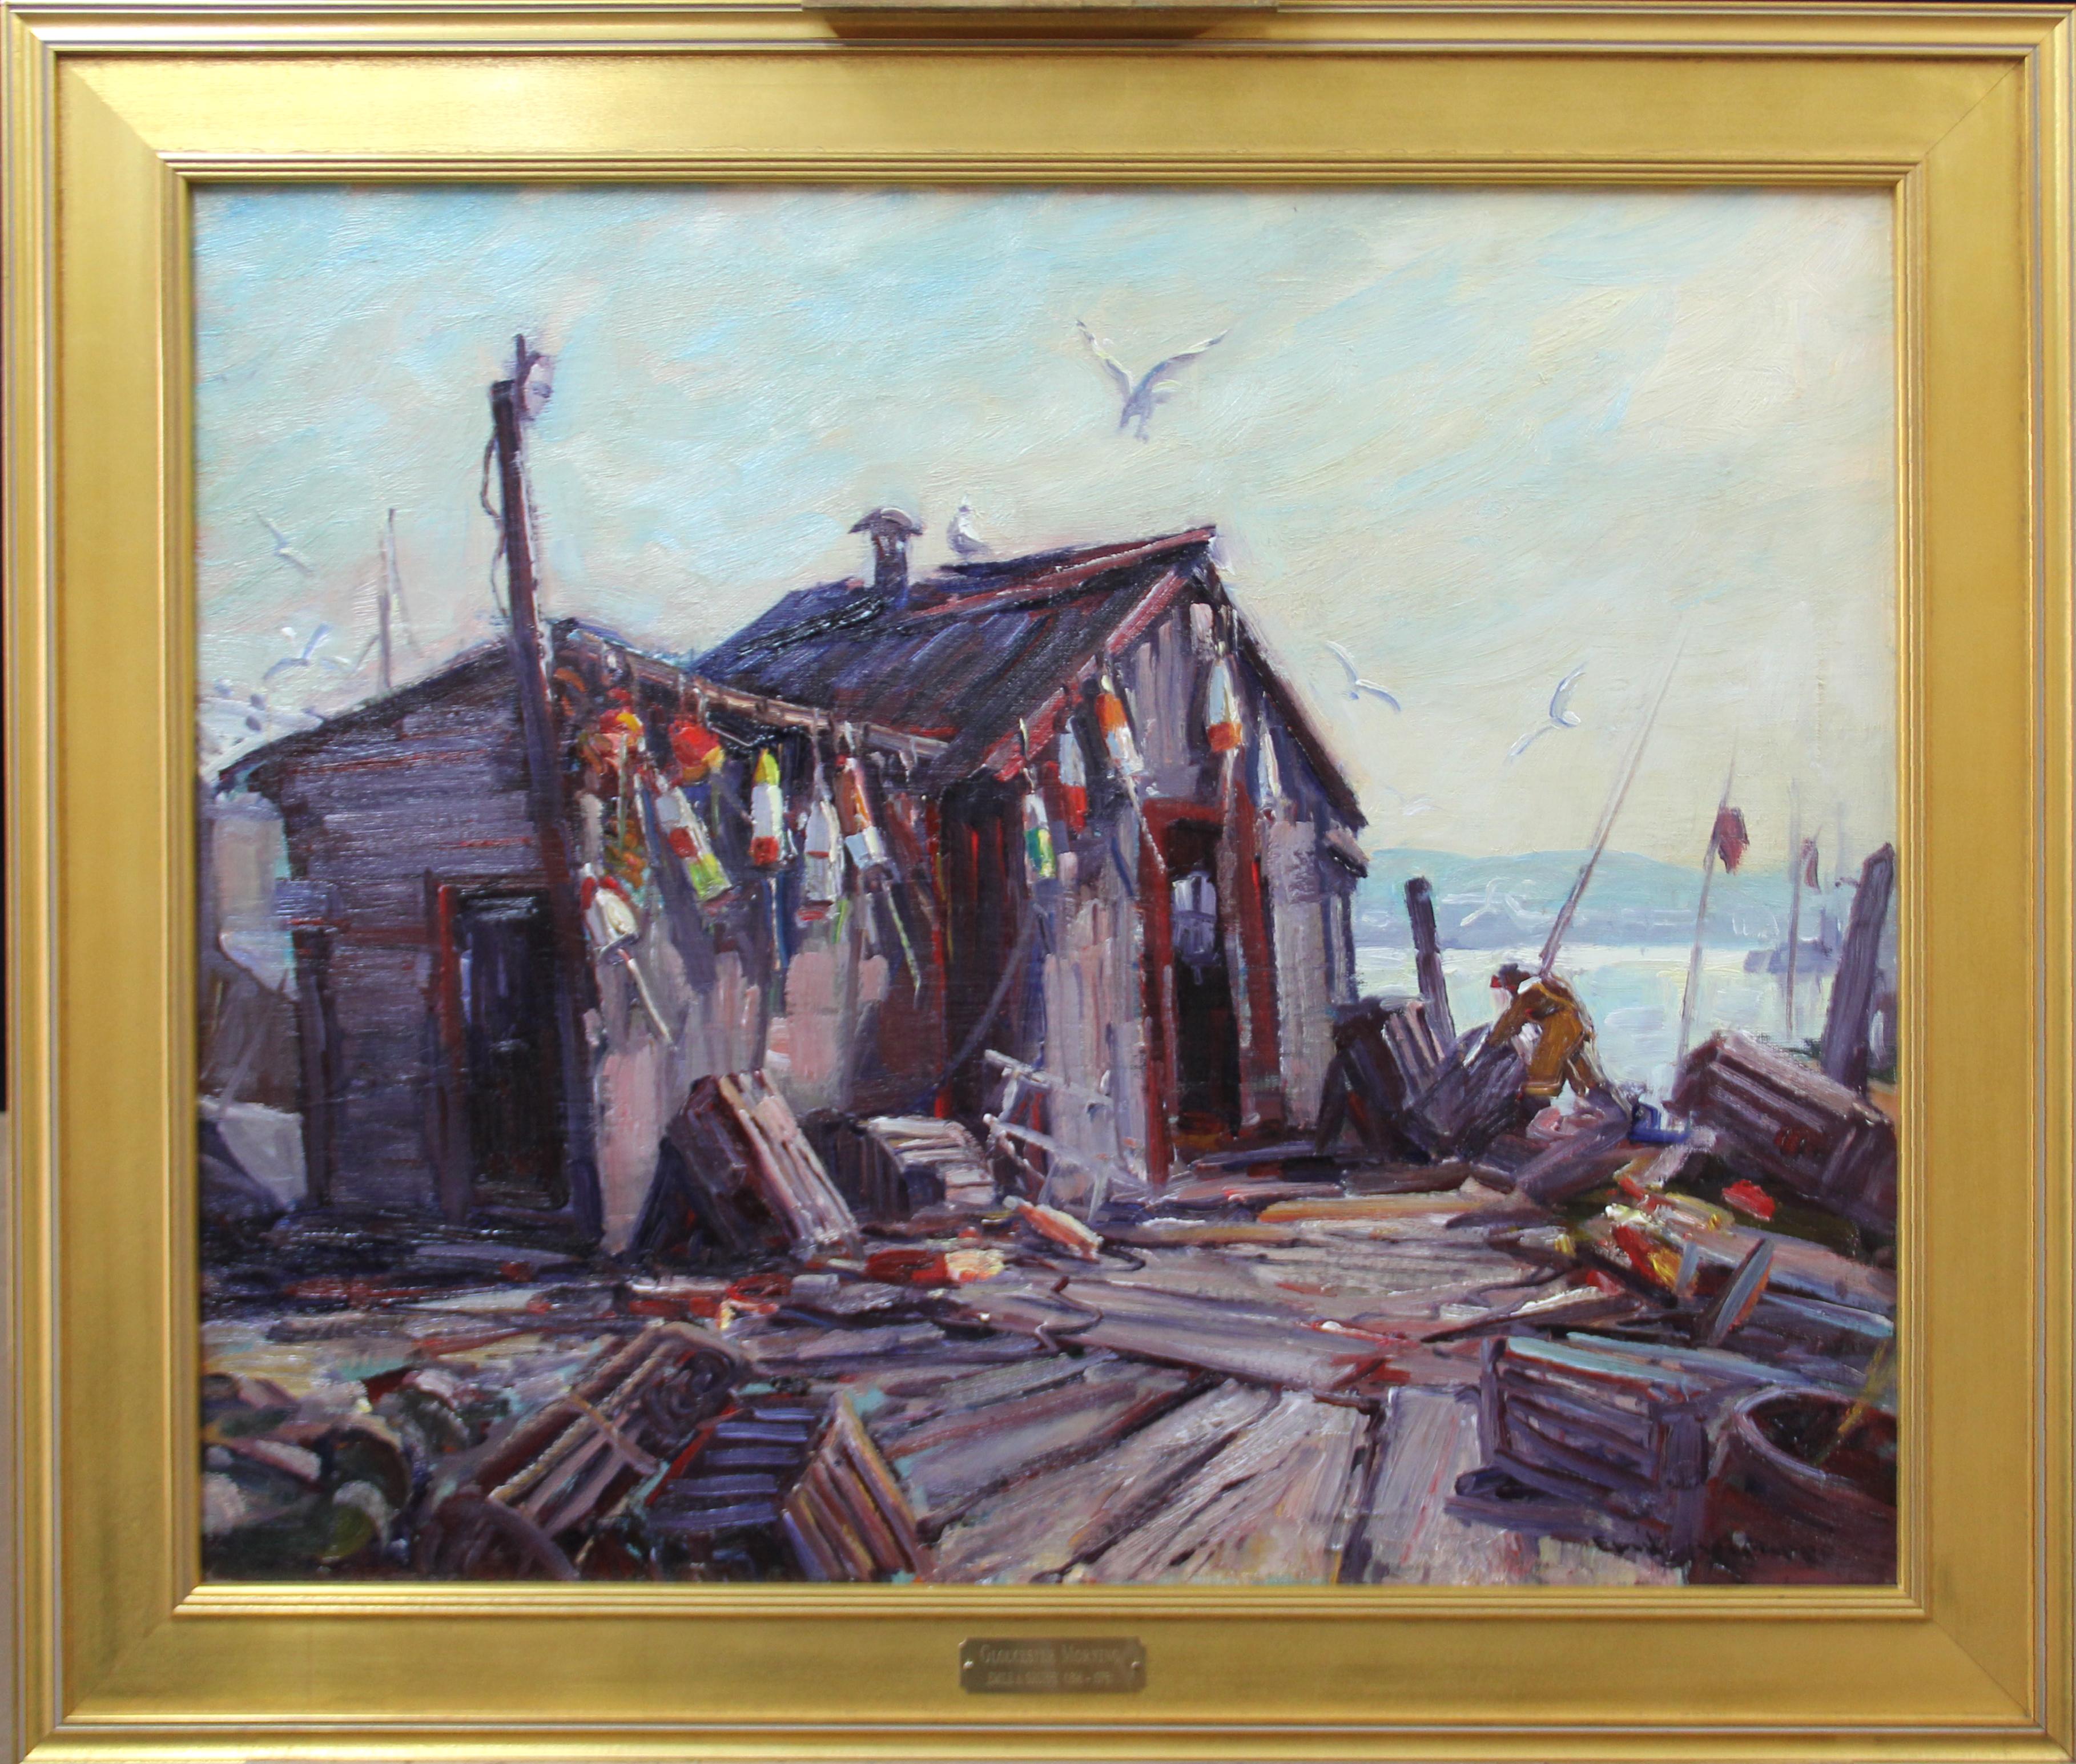 "Gloucester Morning" by Emile Albert Gruppe (1896 - 1978), is a 25" x 30" oil on canvas marine/harbor scene. It is signed "Emile Gruppe" in the lower right and is framed in a 22K gold reproduction frame. The painting came from a private Collection,